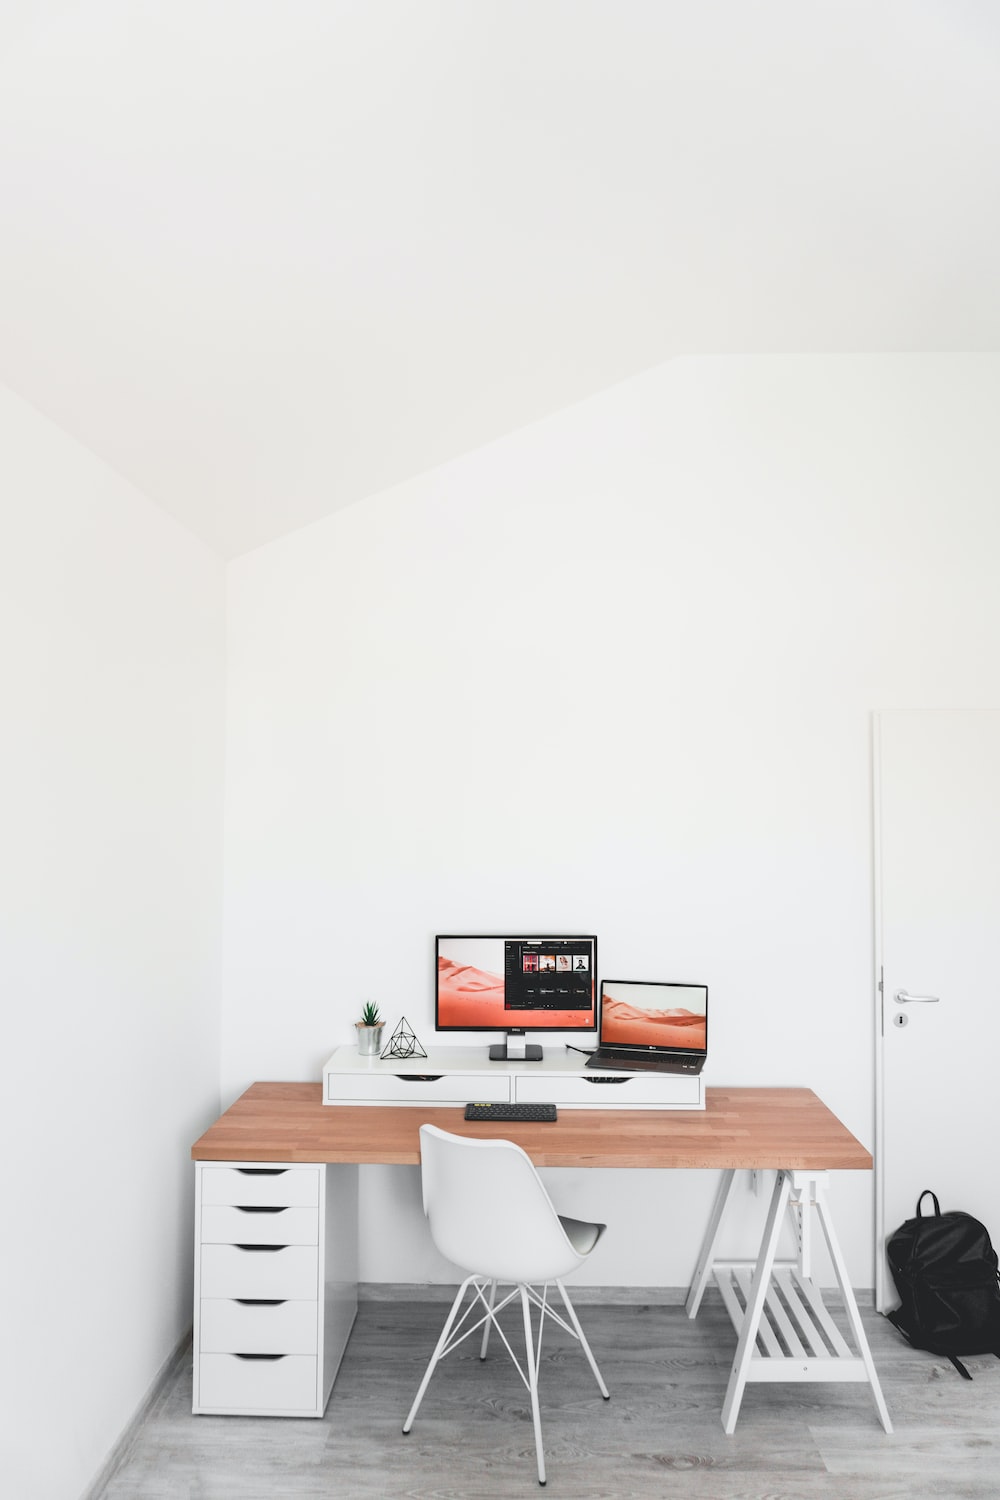 Should your desk face the wall?